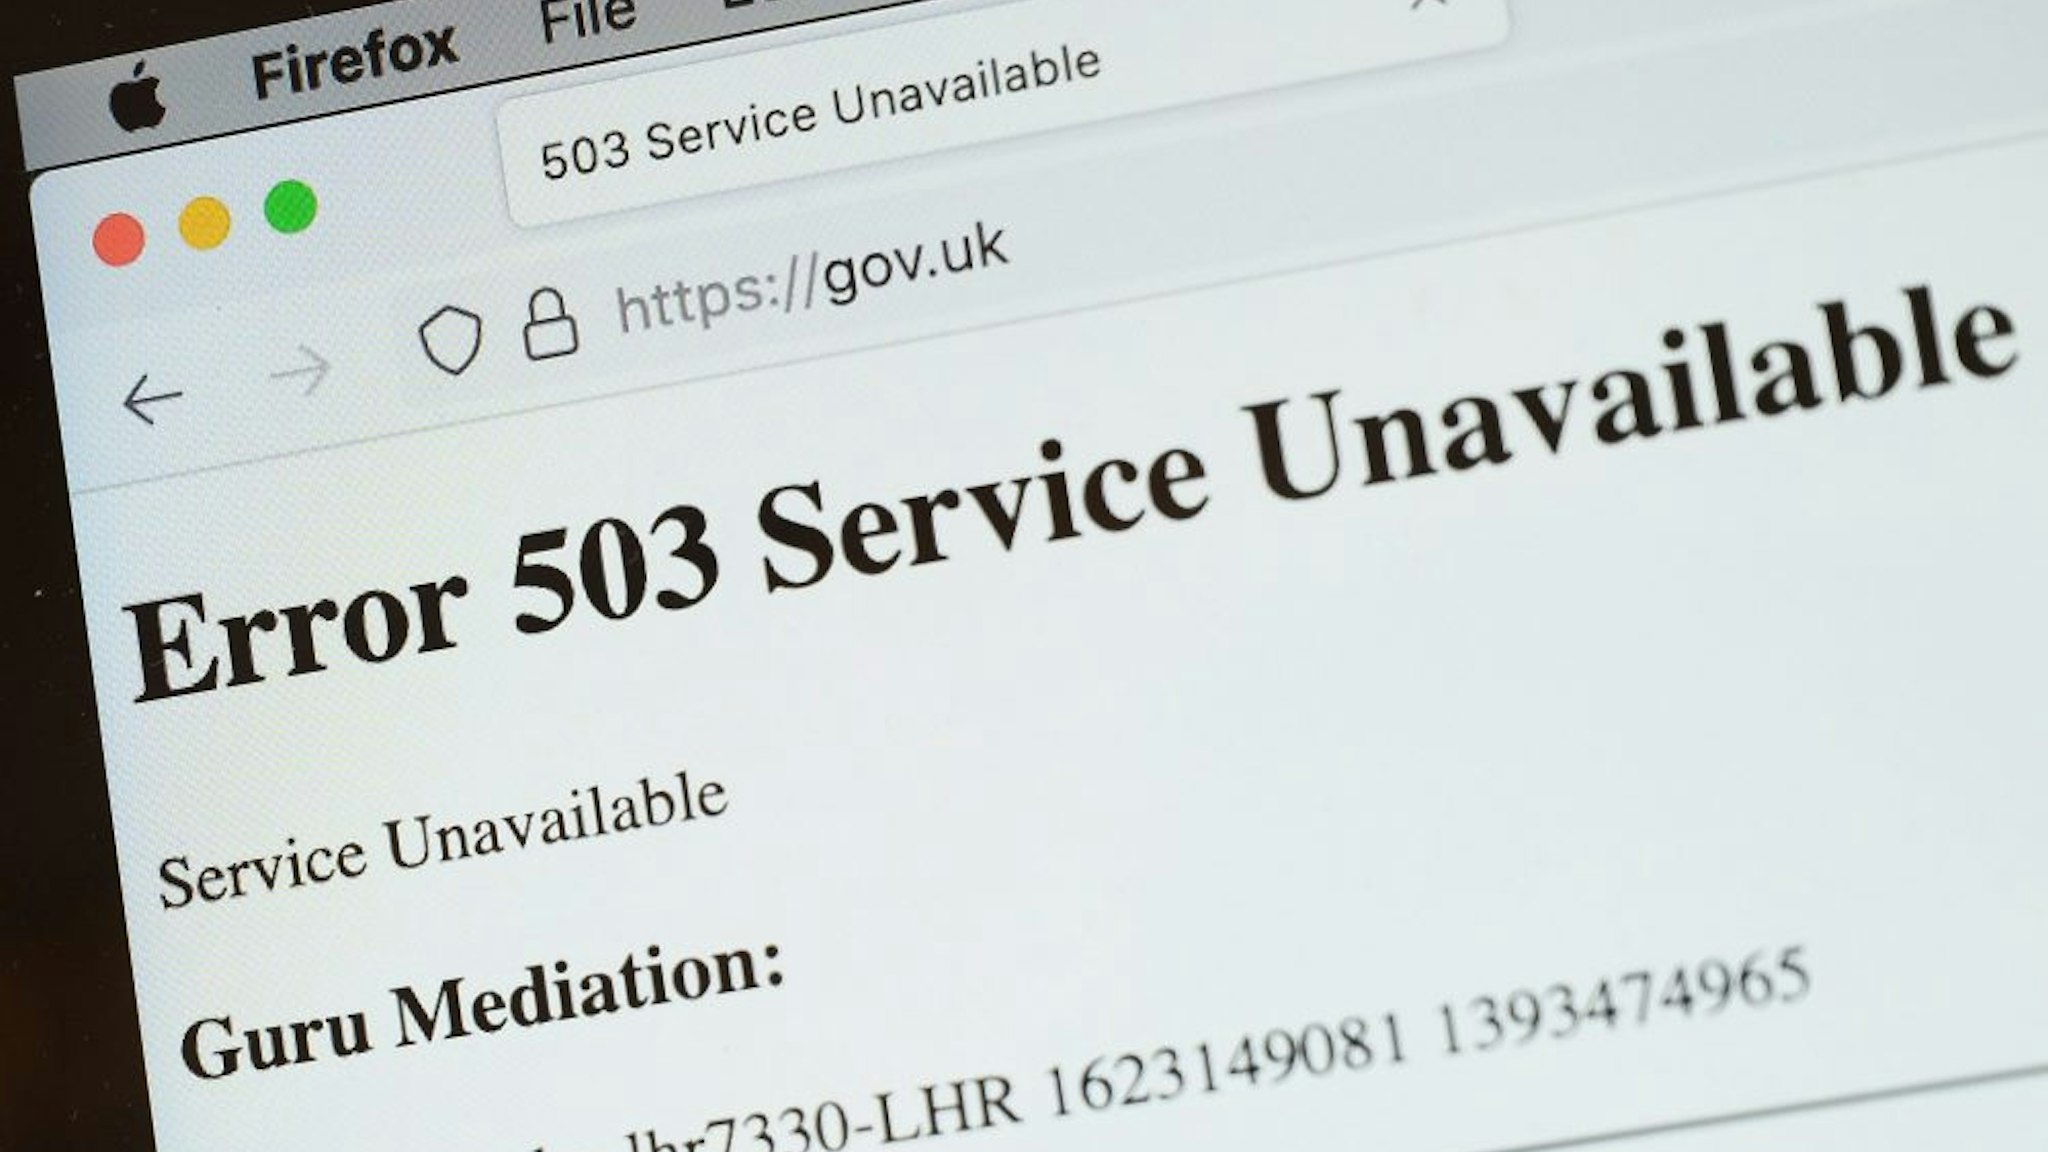 LONDON, ENGLAND - JUNE 08: In this Photo illustration, a screen displays a holding page of the Gov.UK Government website portal on June 08, 2021 in London, England. A wide range of major websites including eBay, Paypal, The Financial Times, Reddit, Twitch and The Guardian were taken offline due to what is believed to be an issue with the Fastly cloud hosting service. Some of the affected websites displayed the message "Error 503 Service Unavailable."